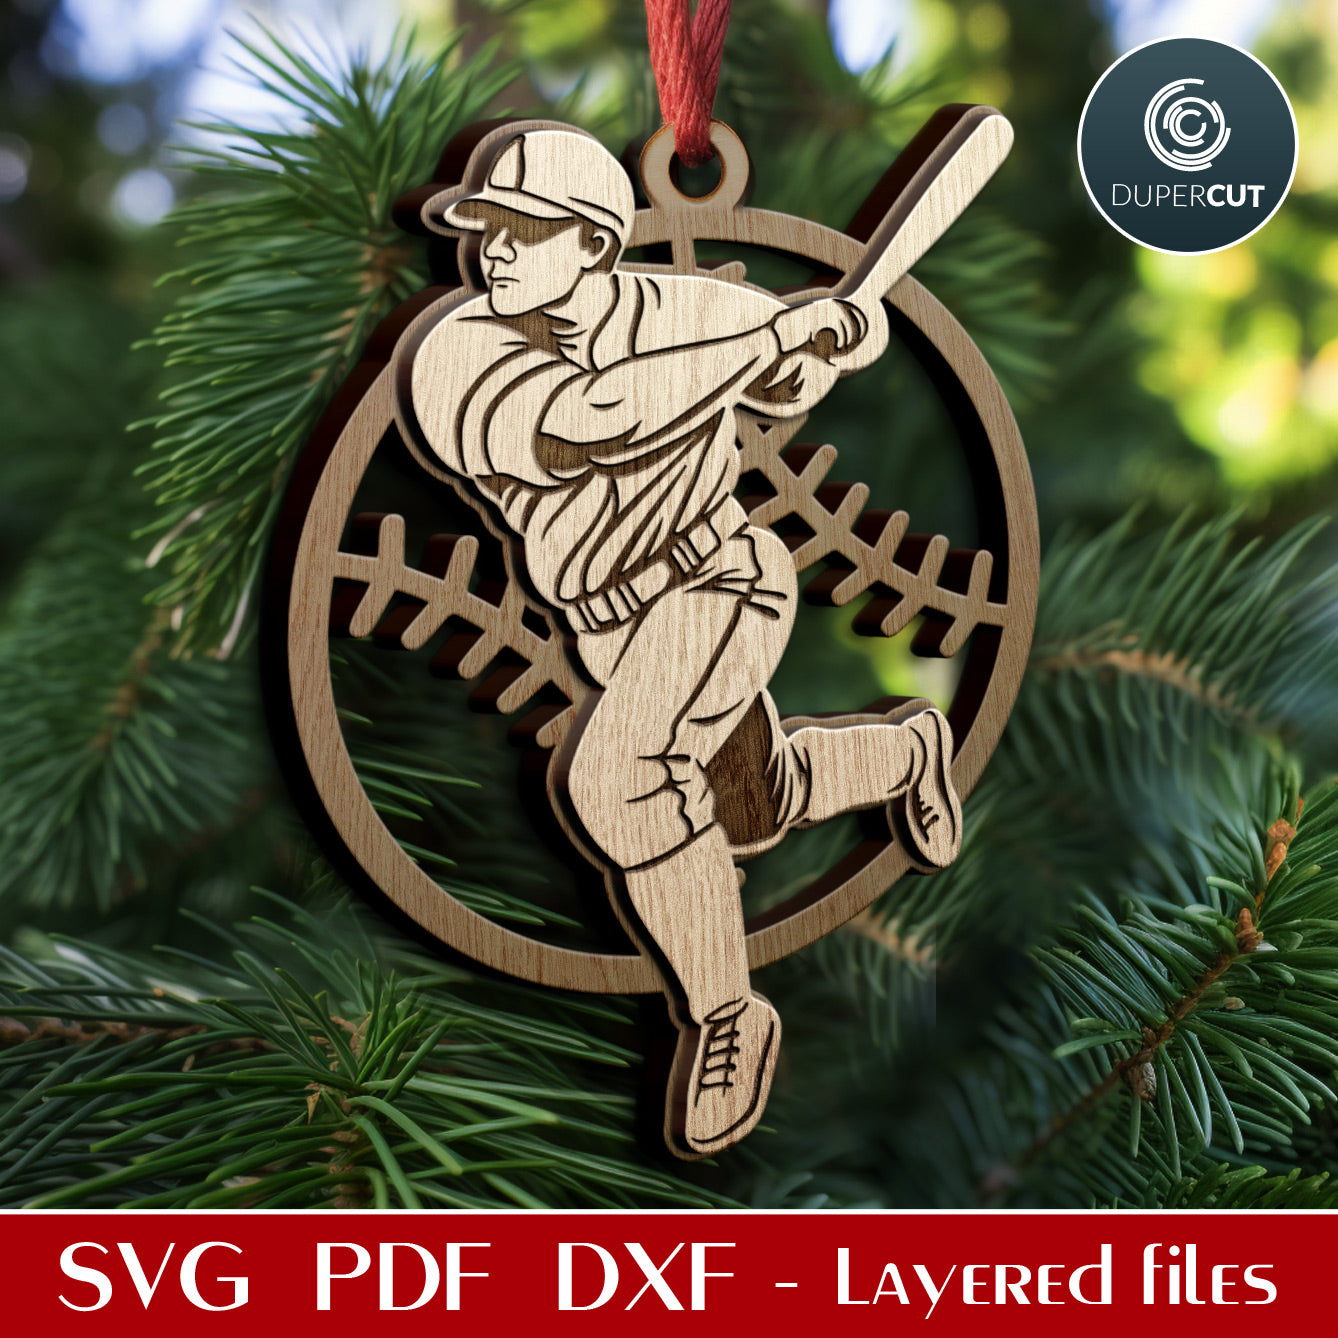 Baseball player sport Christmas ornament, cut and engrave - SVG vector layered file for Glowforge, Cricut, CNC plasma machines by www.DuperCut.com